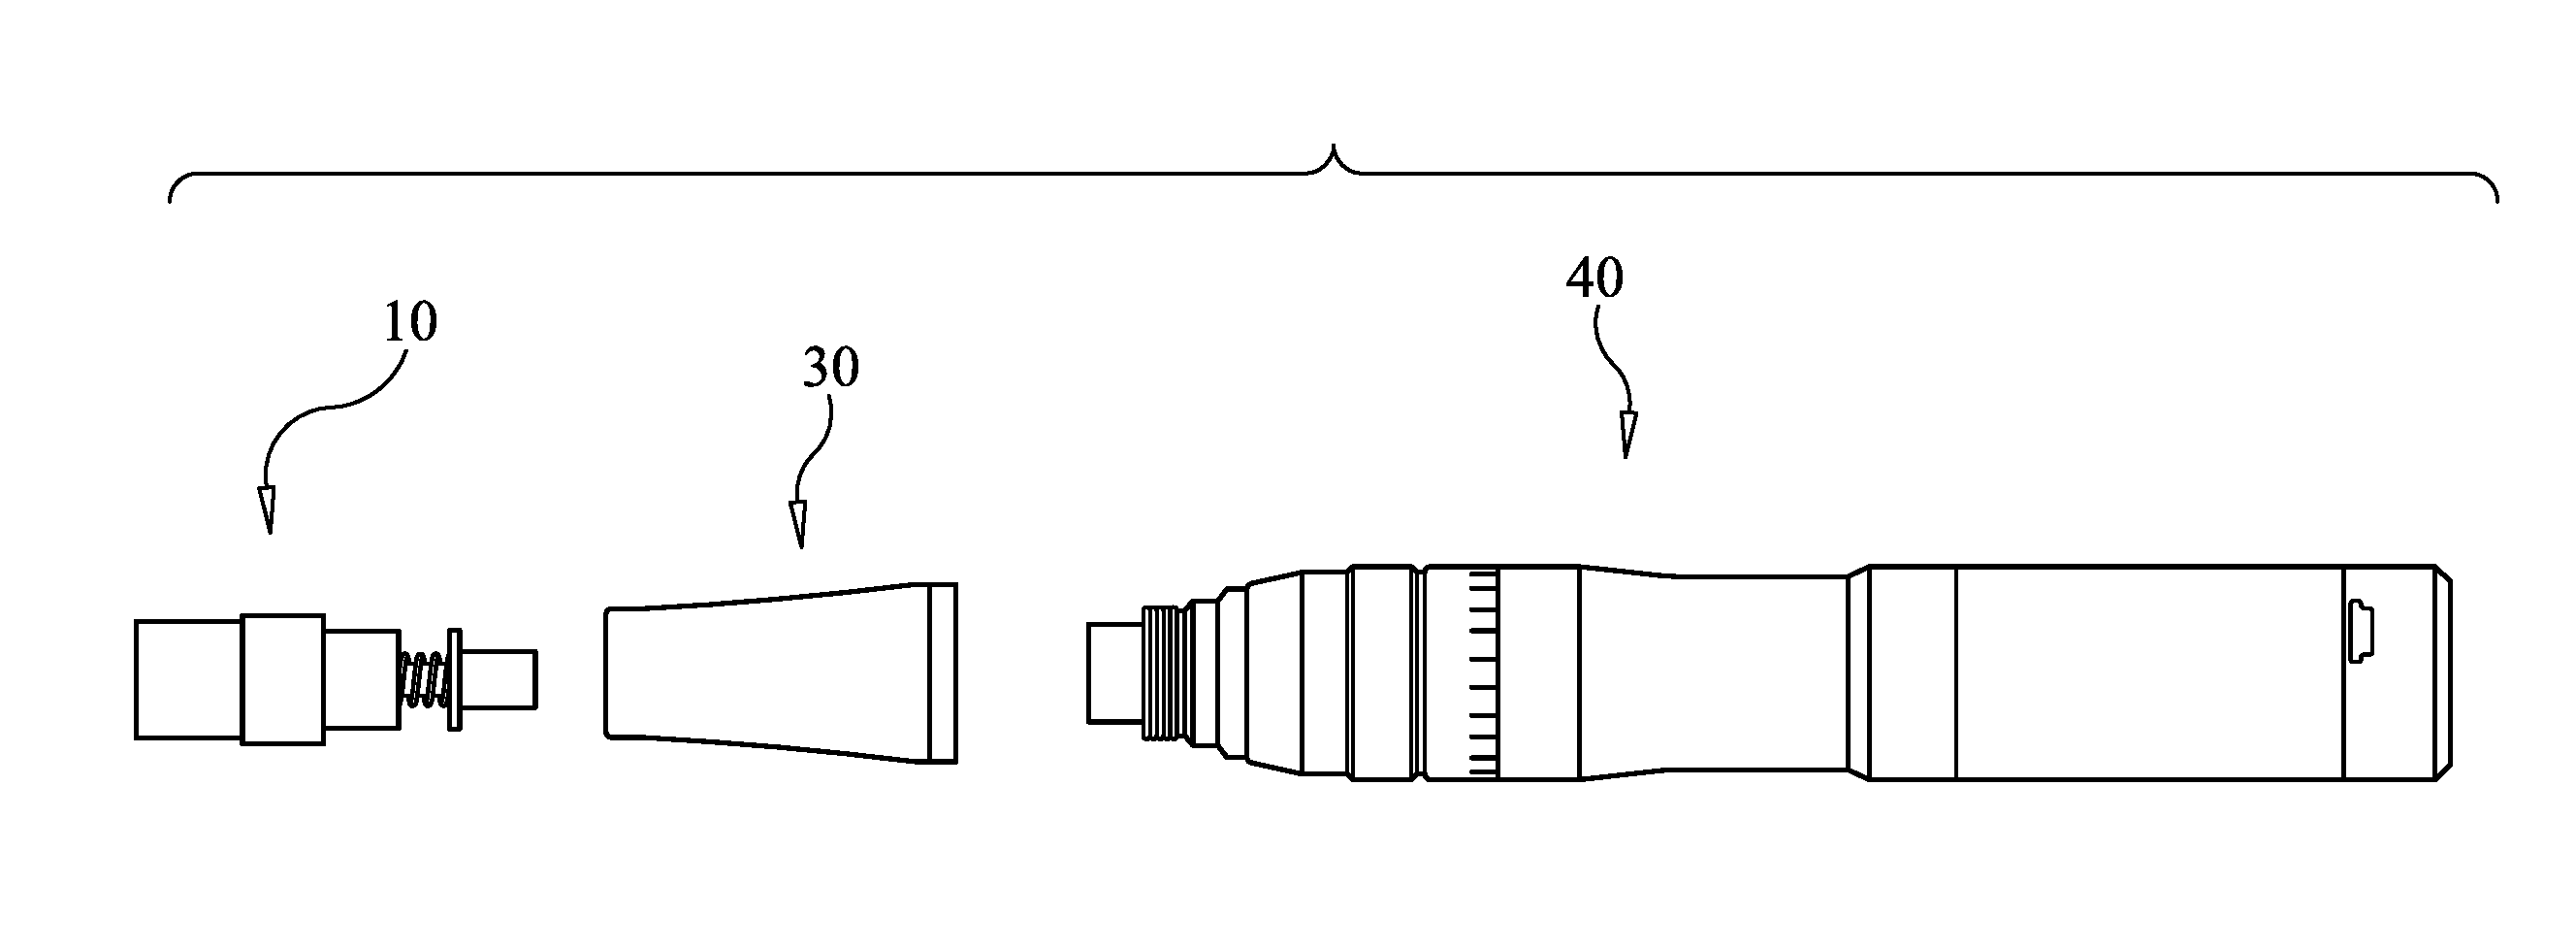 Microneedle Cartridge and Nosecone Assembly